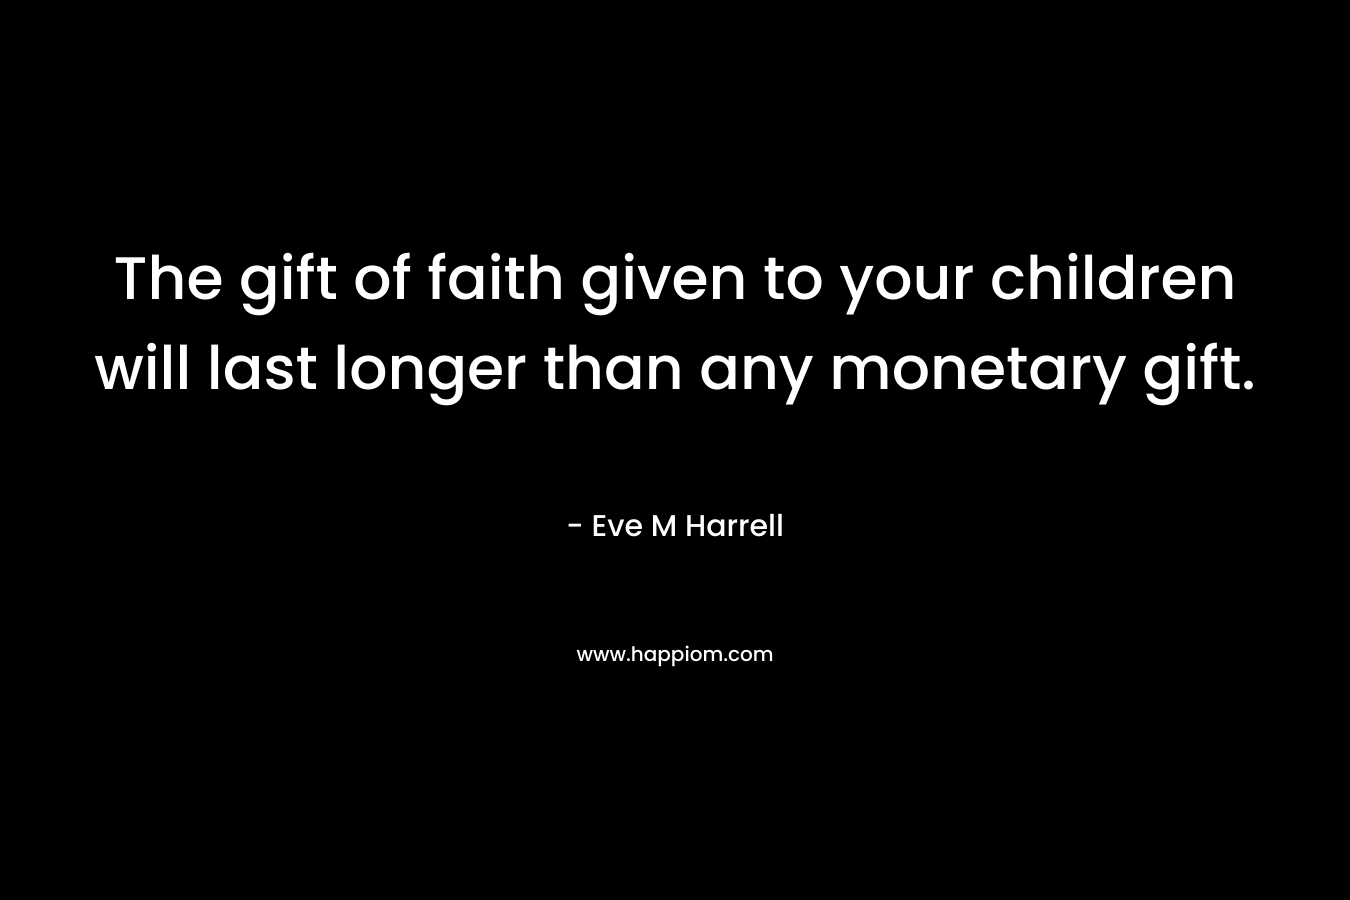 The gift of faith given to your children will last longer than any monetary gift. – Eve M Harrell